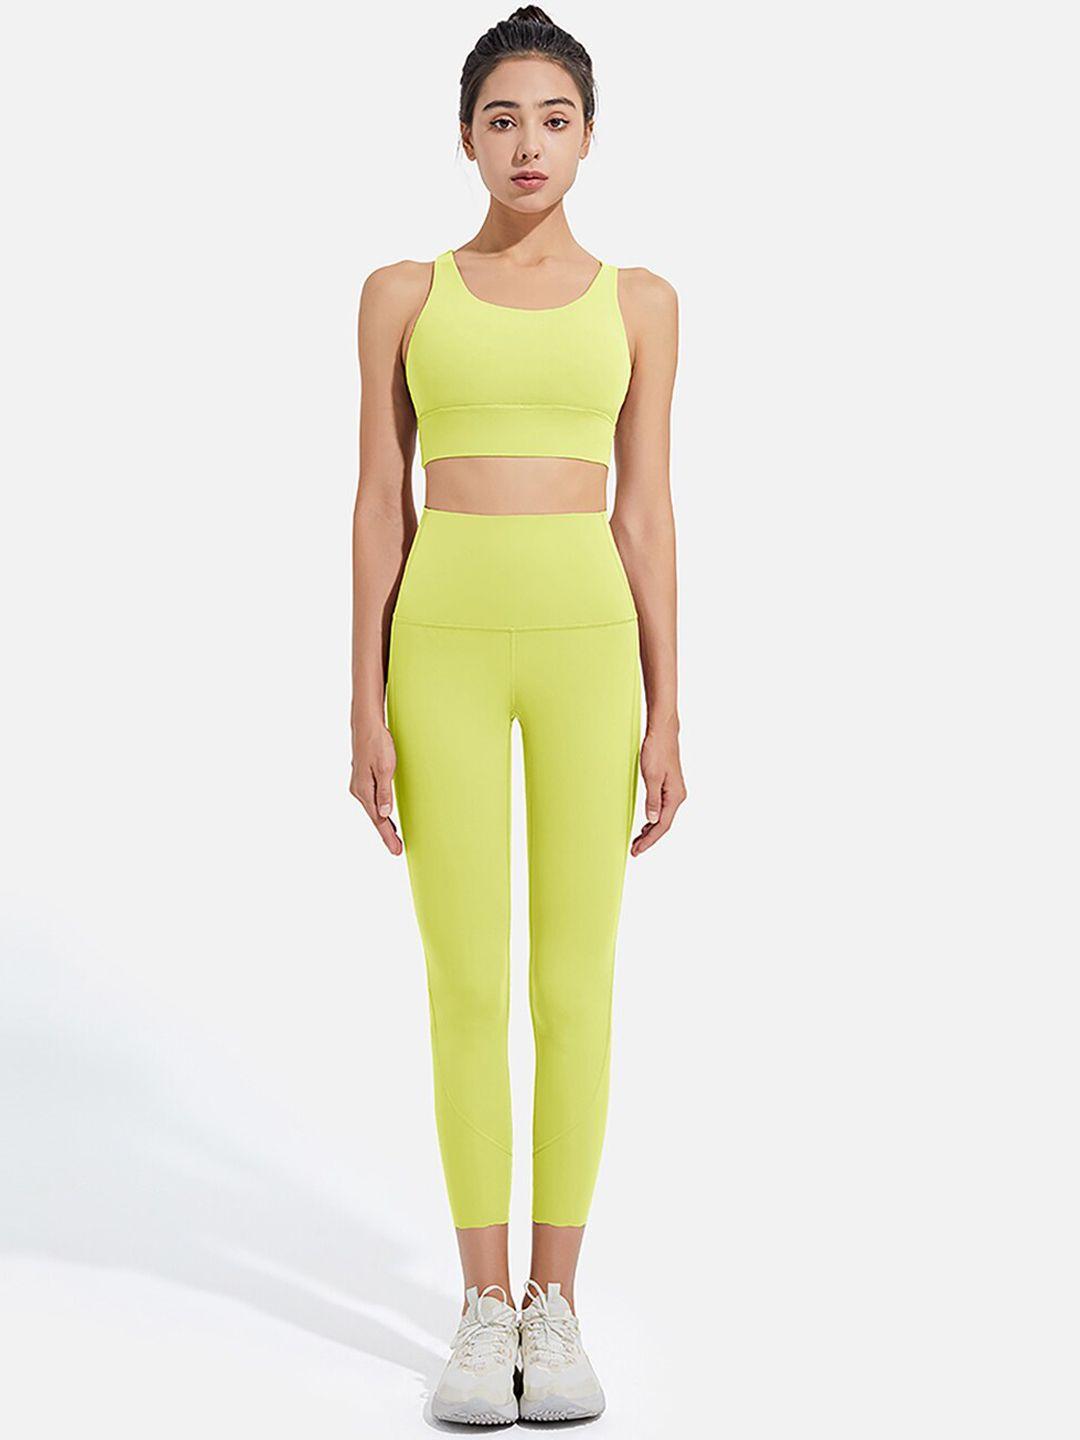 jc collection women lime green solid sports co-ord